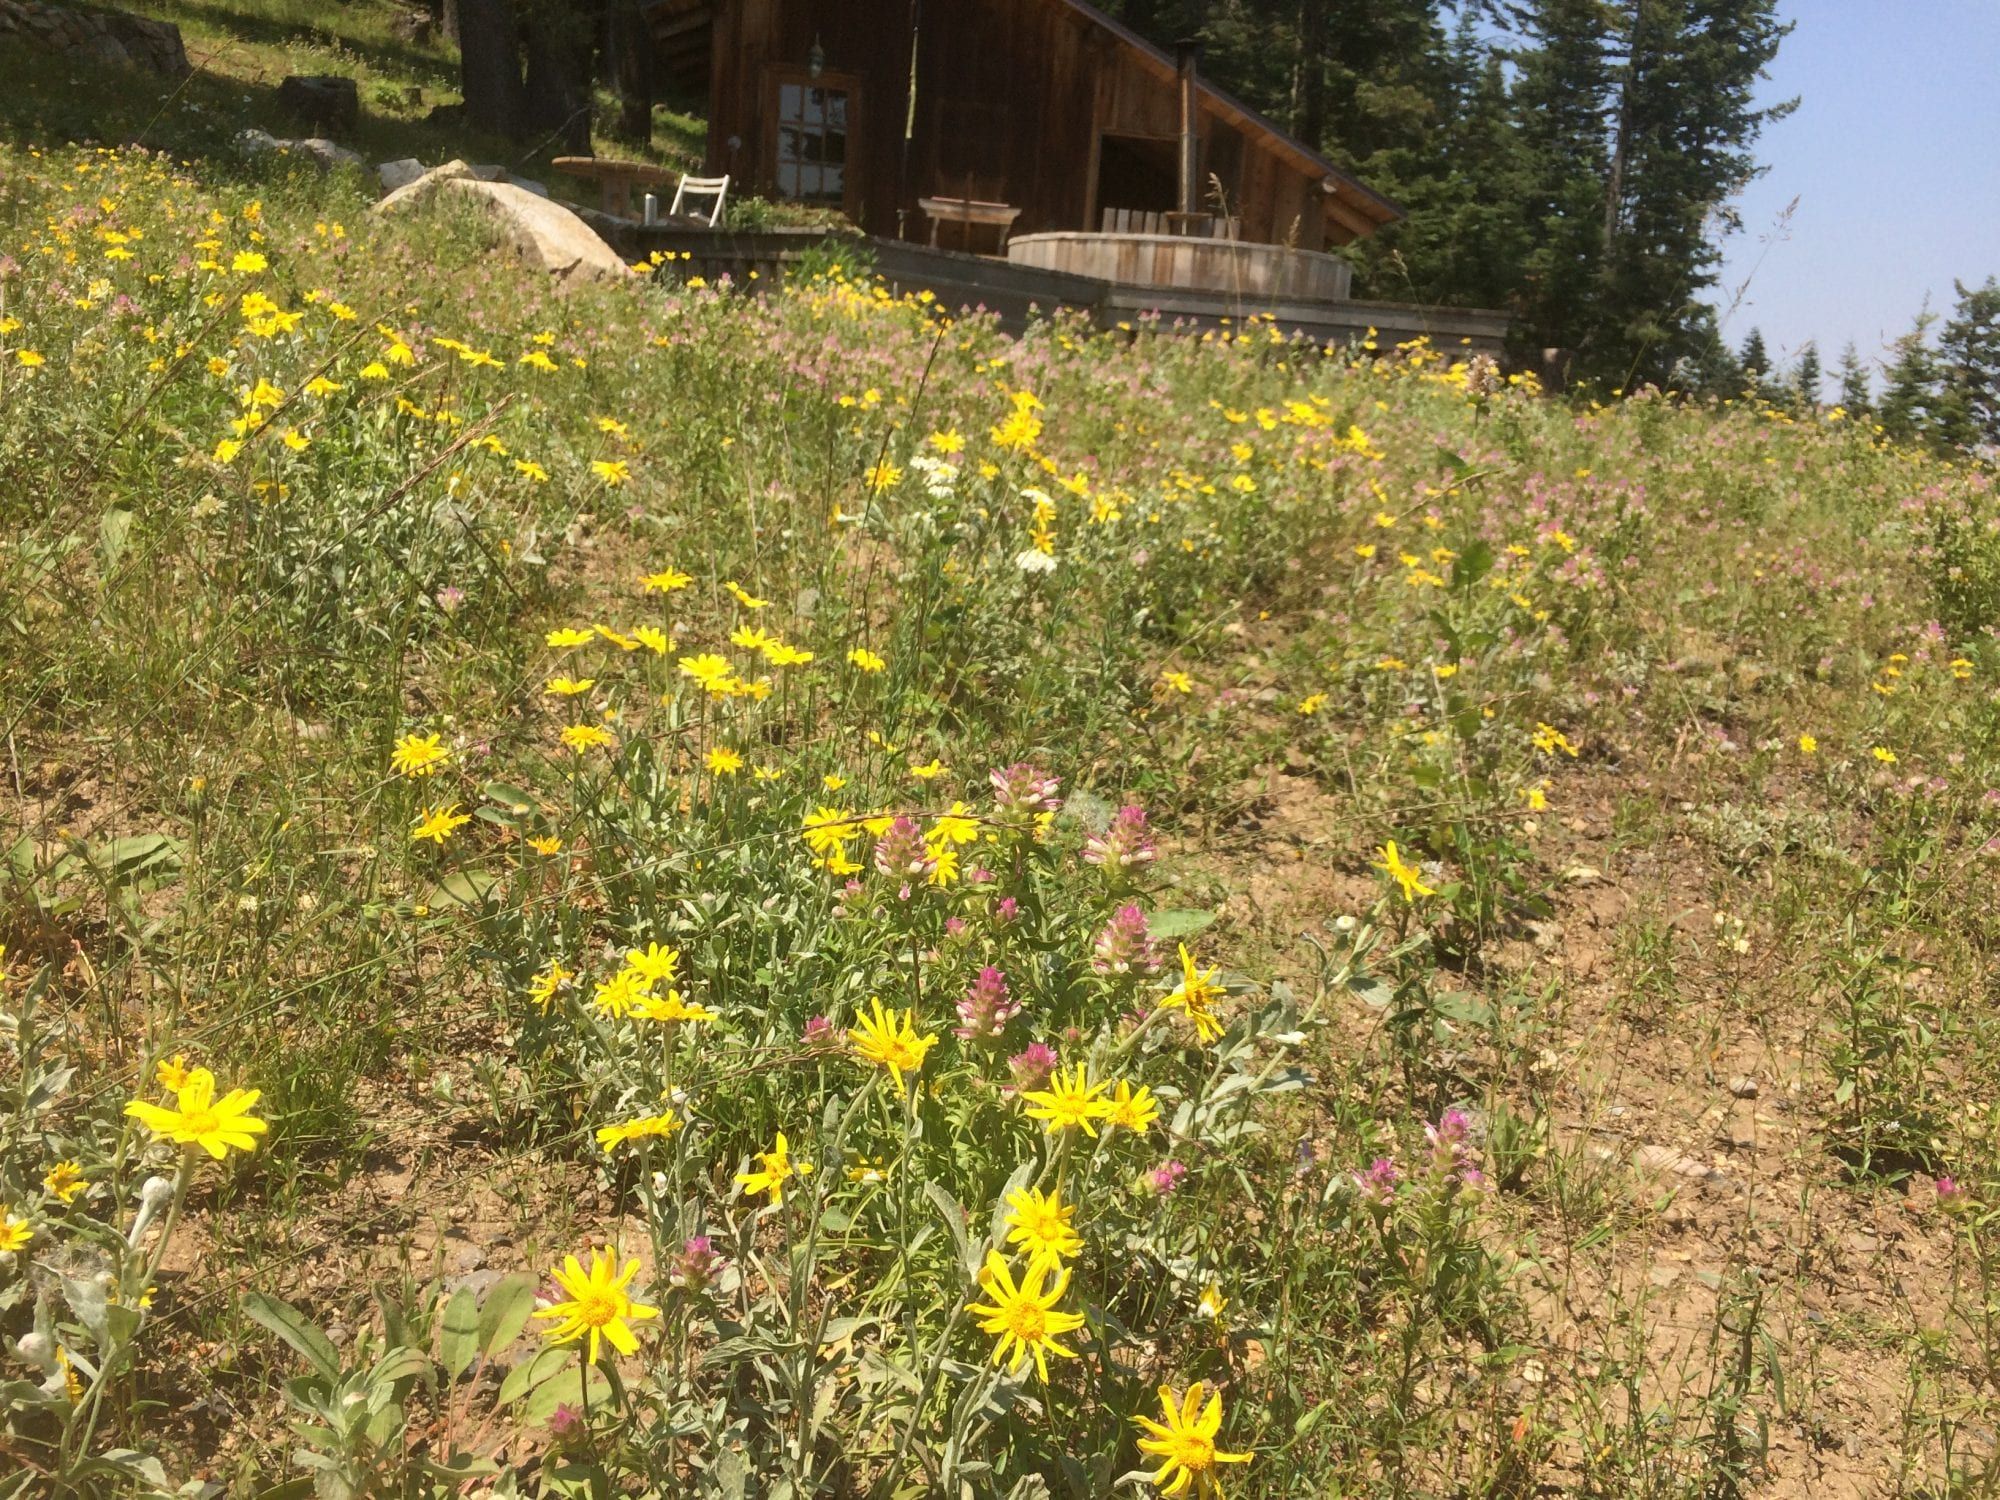 Landscaped native plant meadow in the Siskiyou Mountains